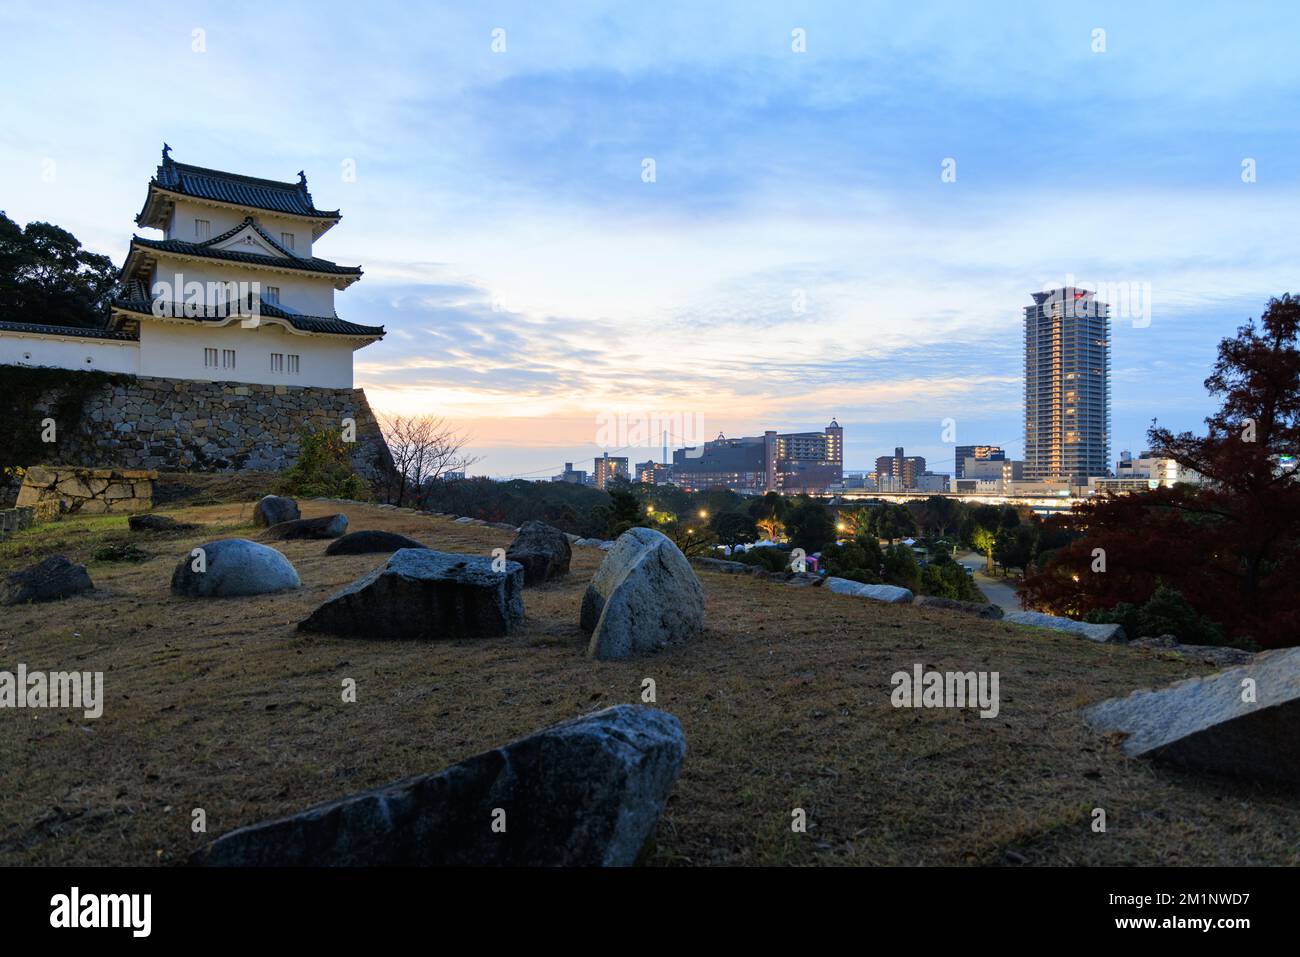 Predawn color in sky over historic Japanese castle and modern tower Stock Photo